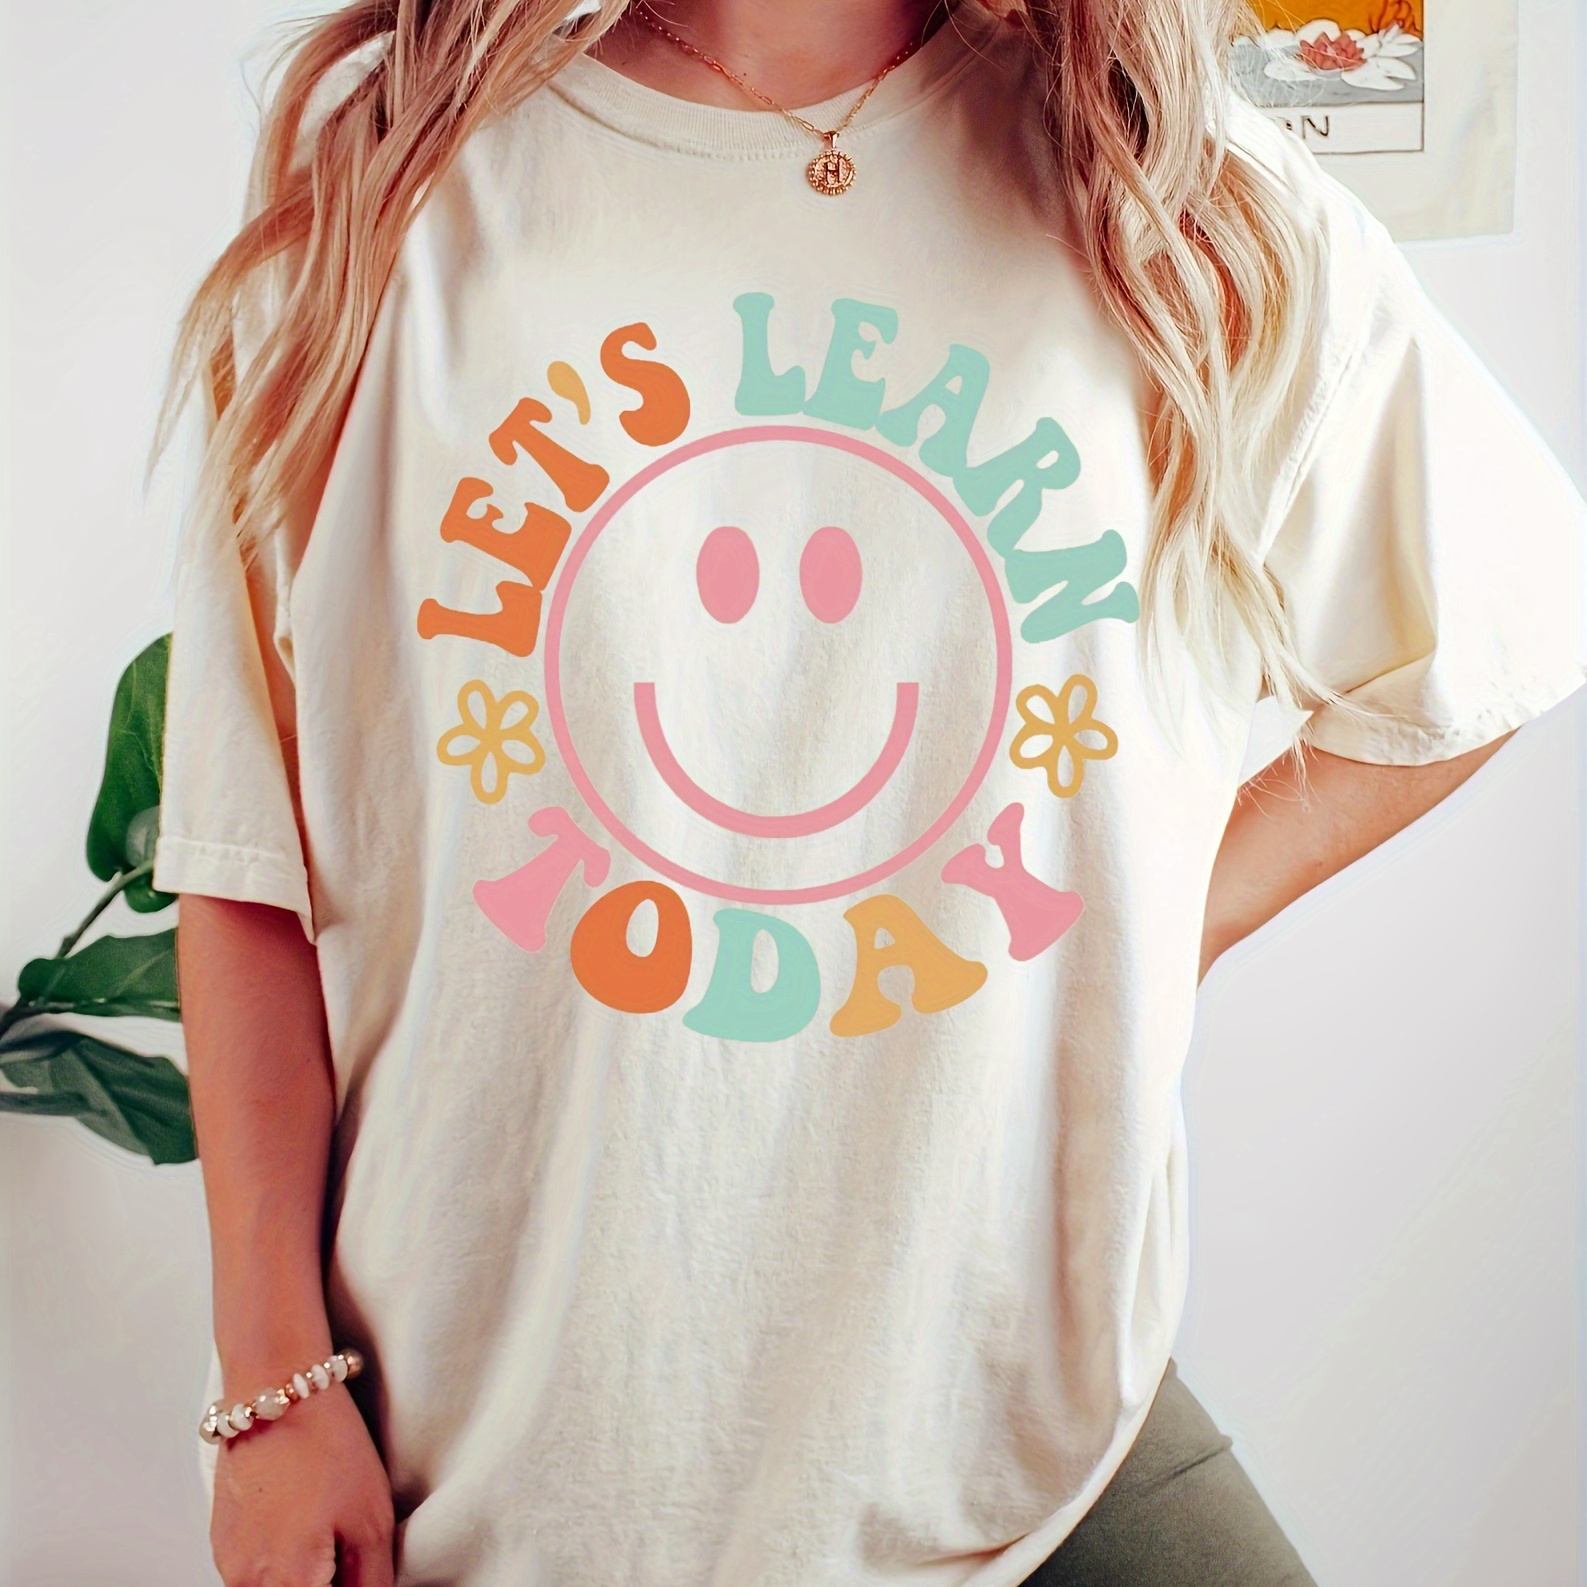 

Letter & Smile Face Print T-shirt, Casual Short Sleeve Crew Neck Top, Women's Clothing